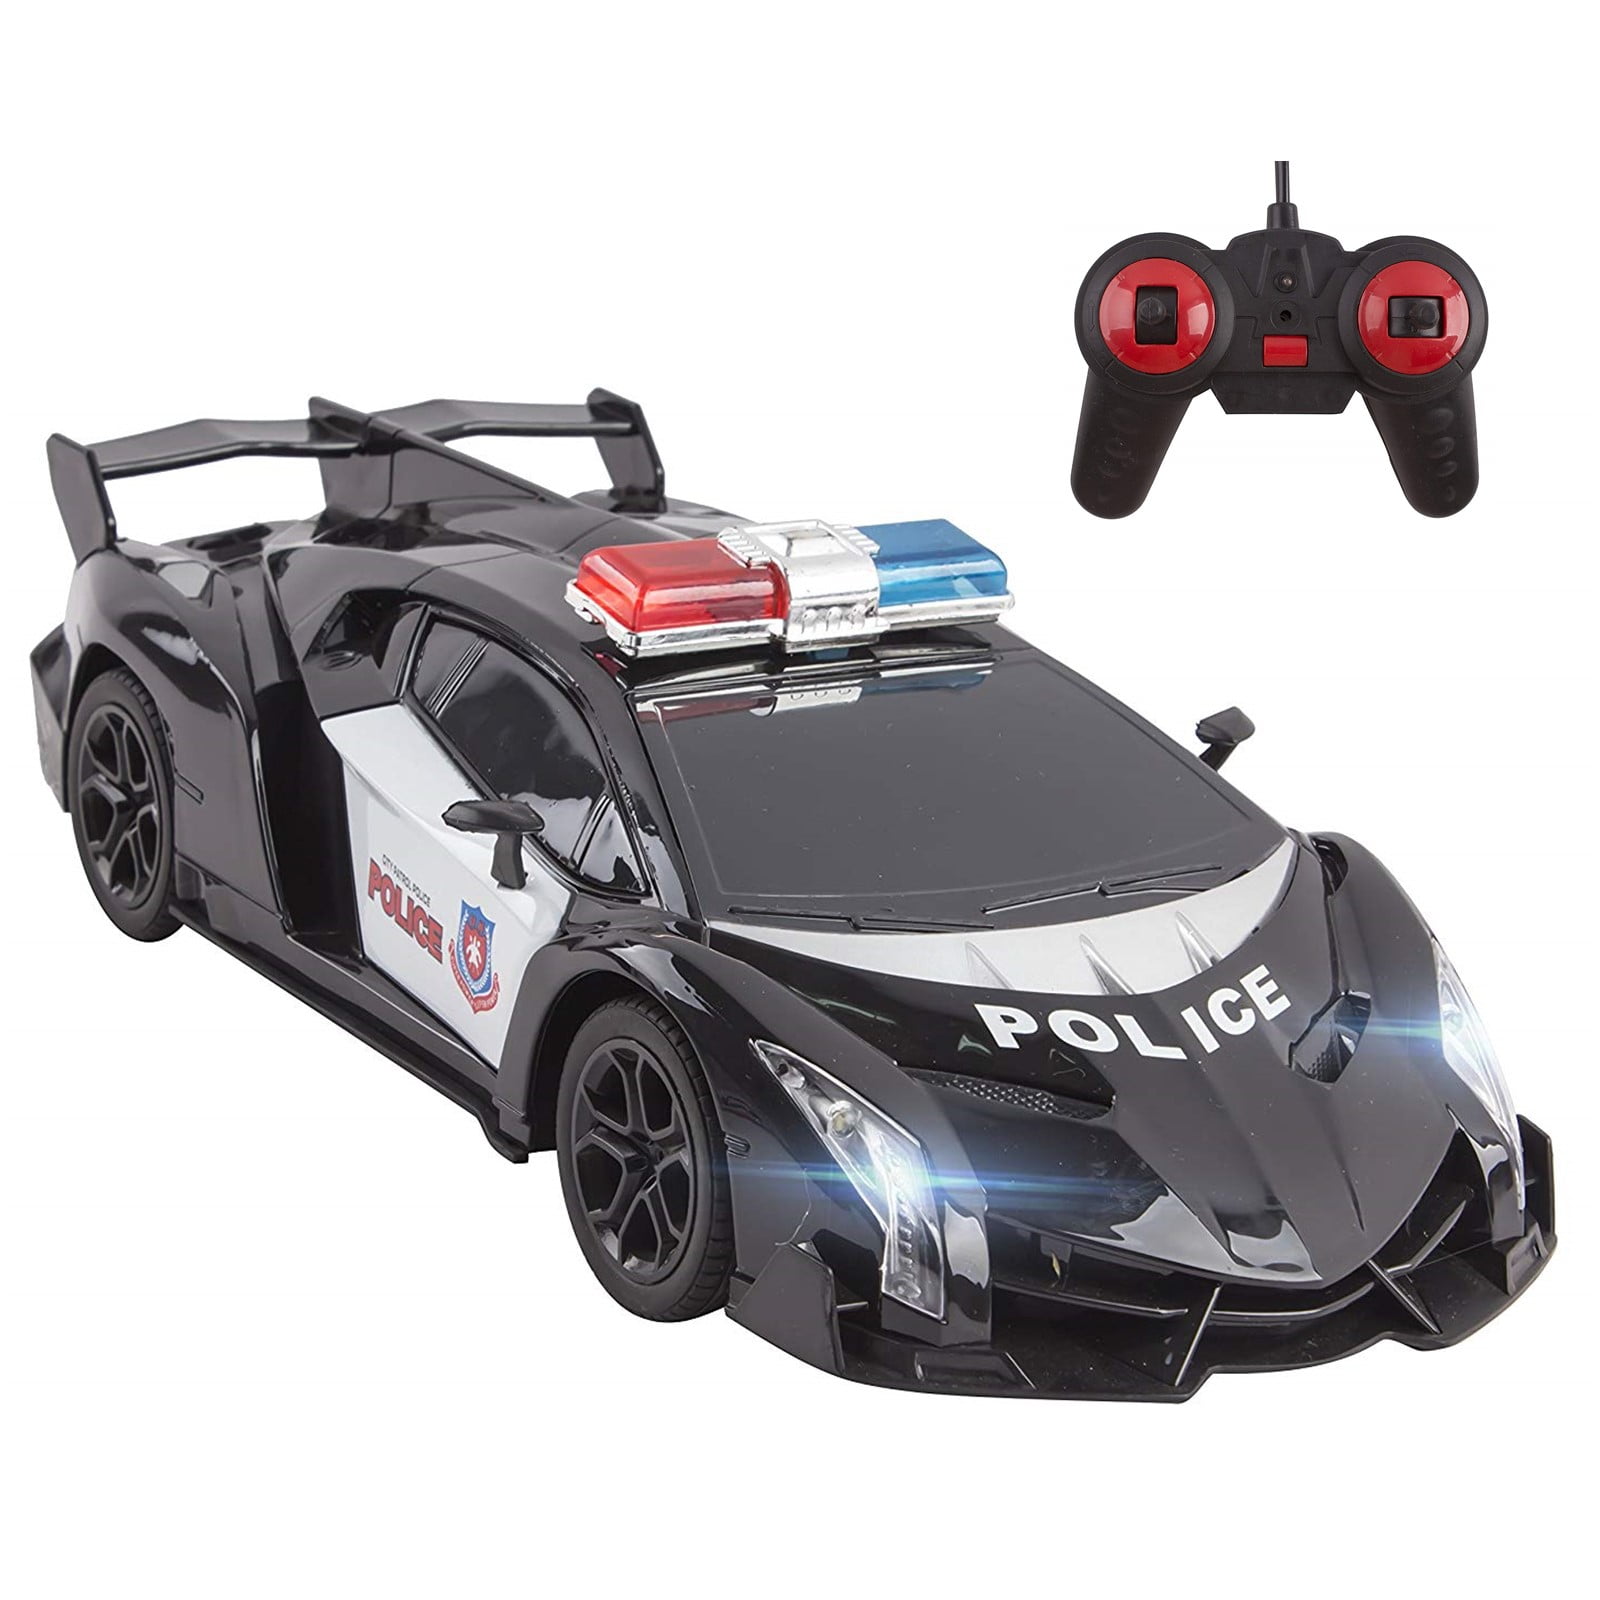 Super Racer Model Vehicles Remote Control Toy Car With Light 1:12 For Kids Gift